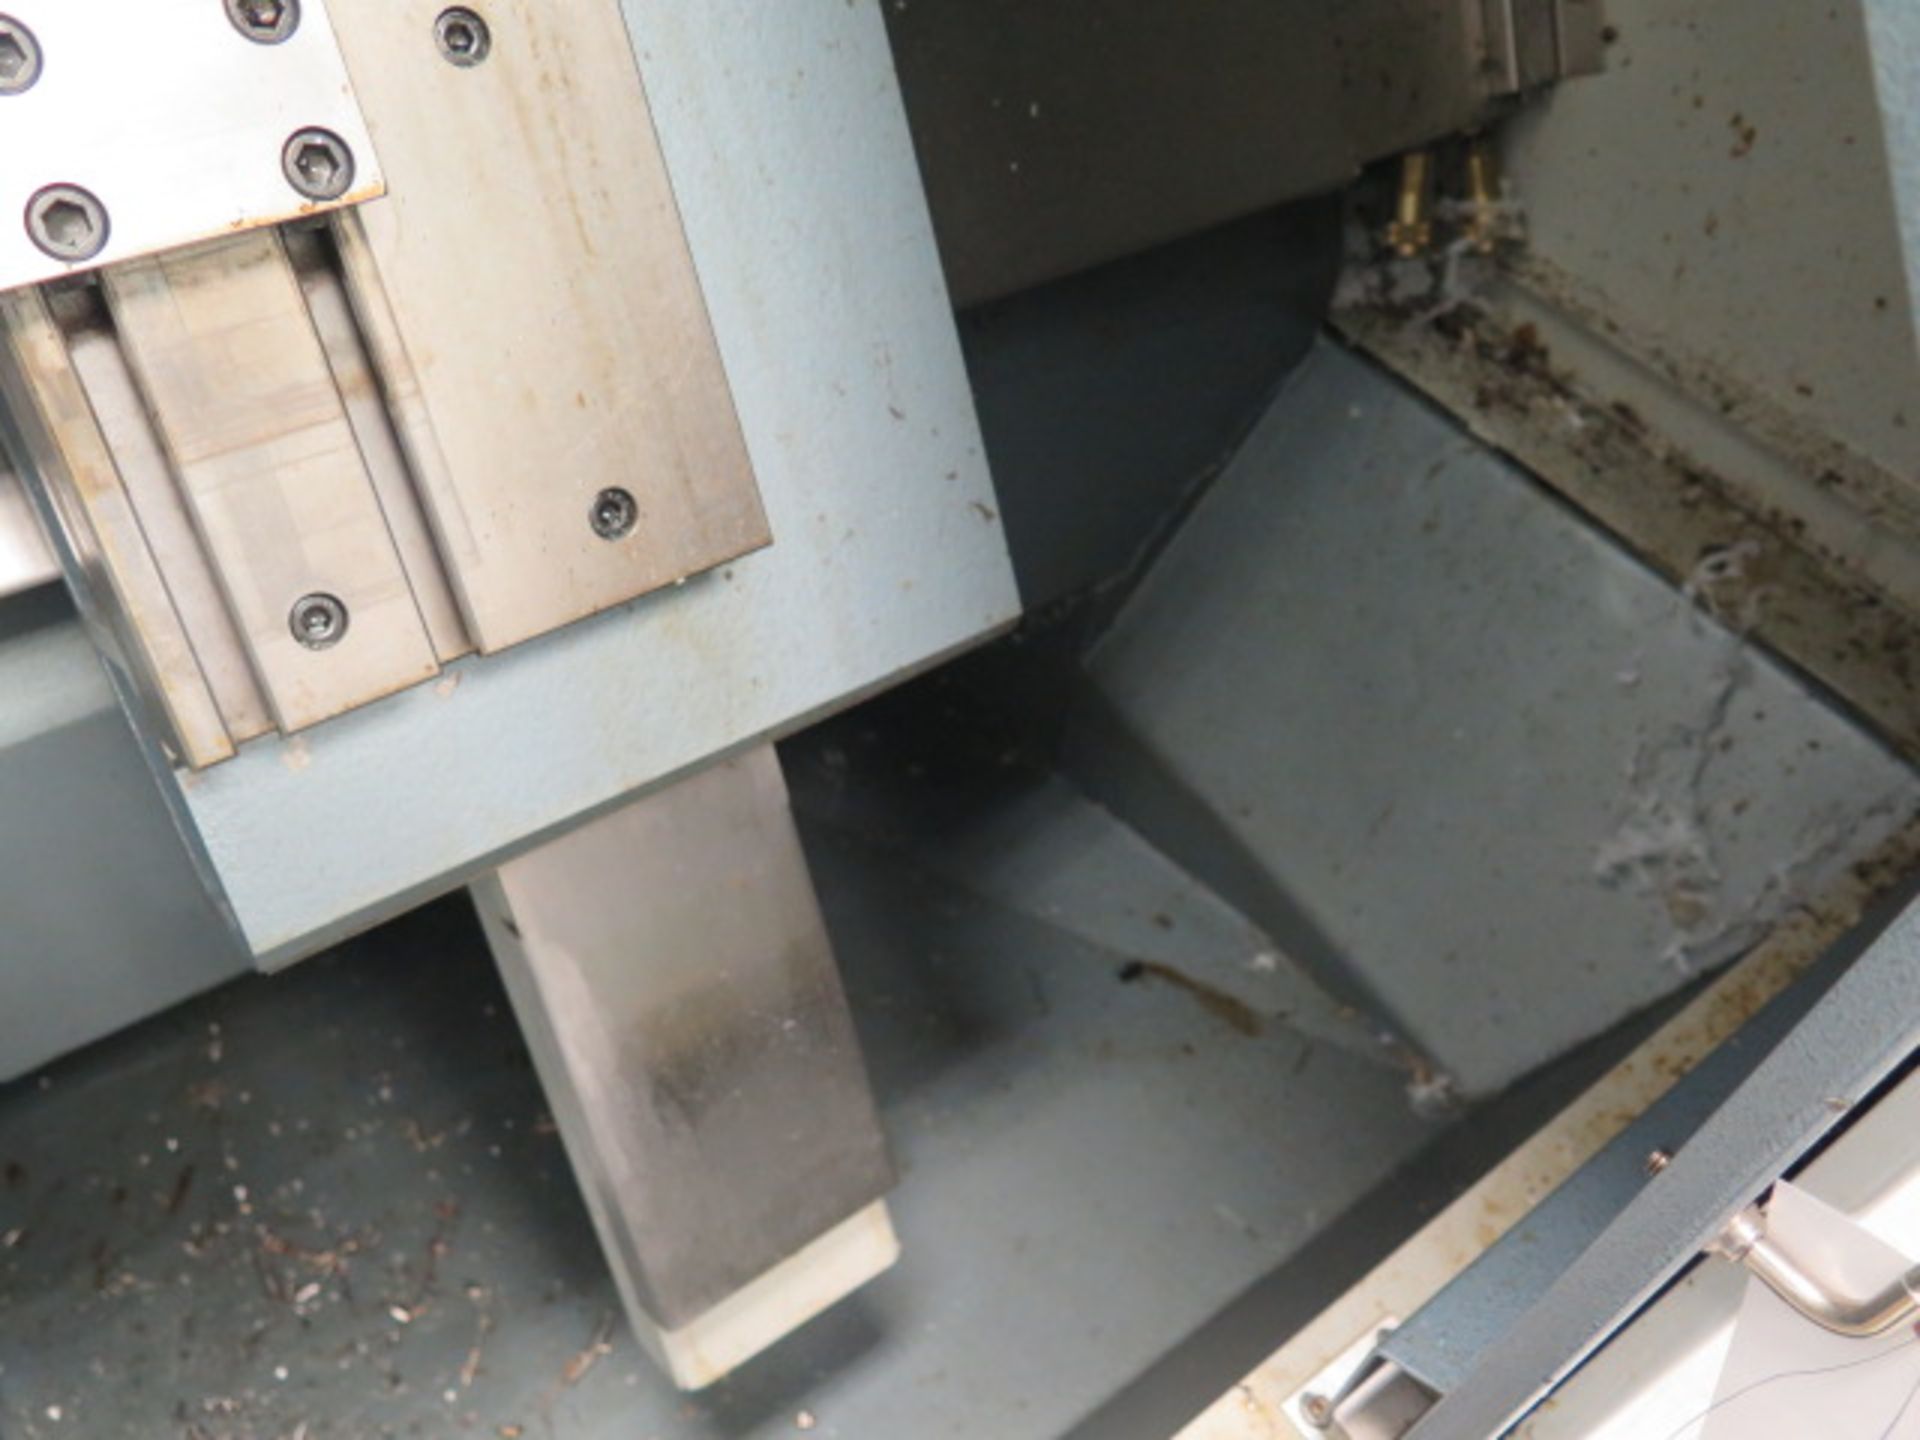 CMS mdl. GTD CNC Cross Slide Lathe w/ Fagor CNC Controls, 6000 RPM, 5C Collet Closer, SOLD AS IS - Image 8 of 14